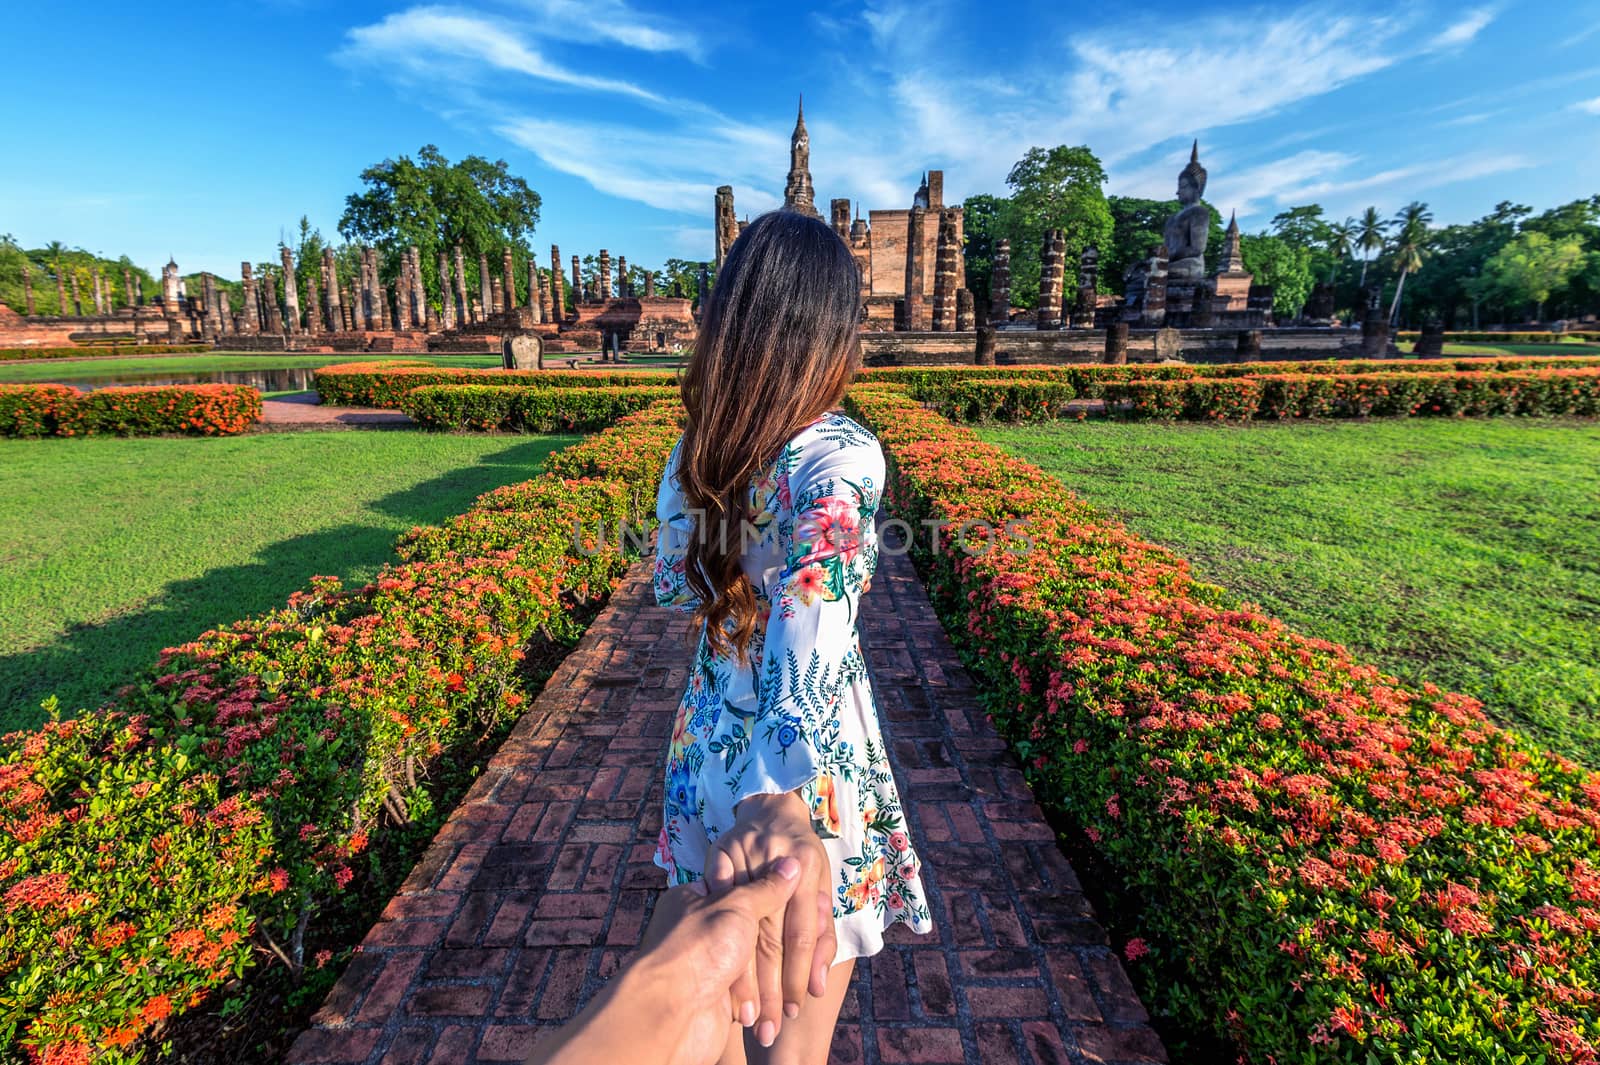 Woman holding man's hand and leading him to Wat Mahathat Temple in the precinct of Sukhothai Historical Park, Wat Mahathat Temple is UNESCO World Heritage Site, Thailand. by gutarphotoghaphy